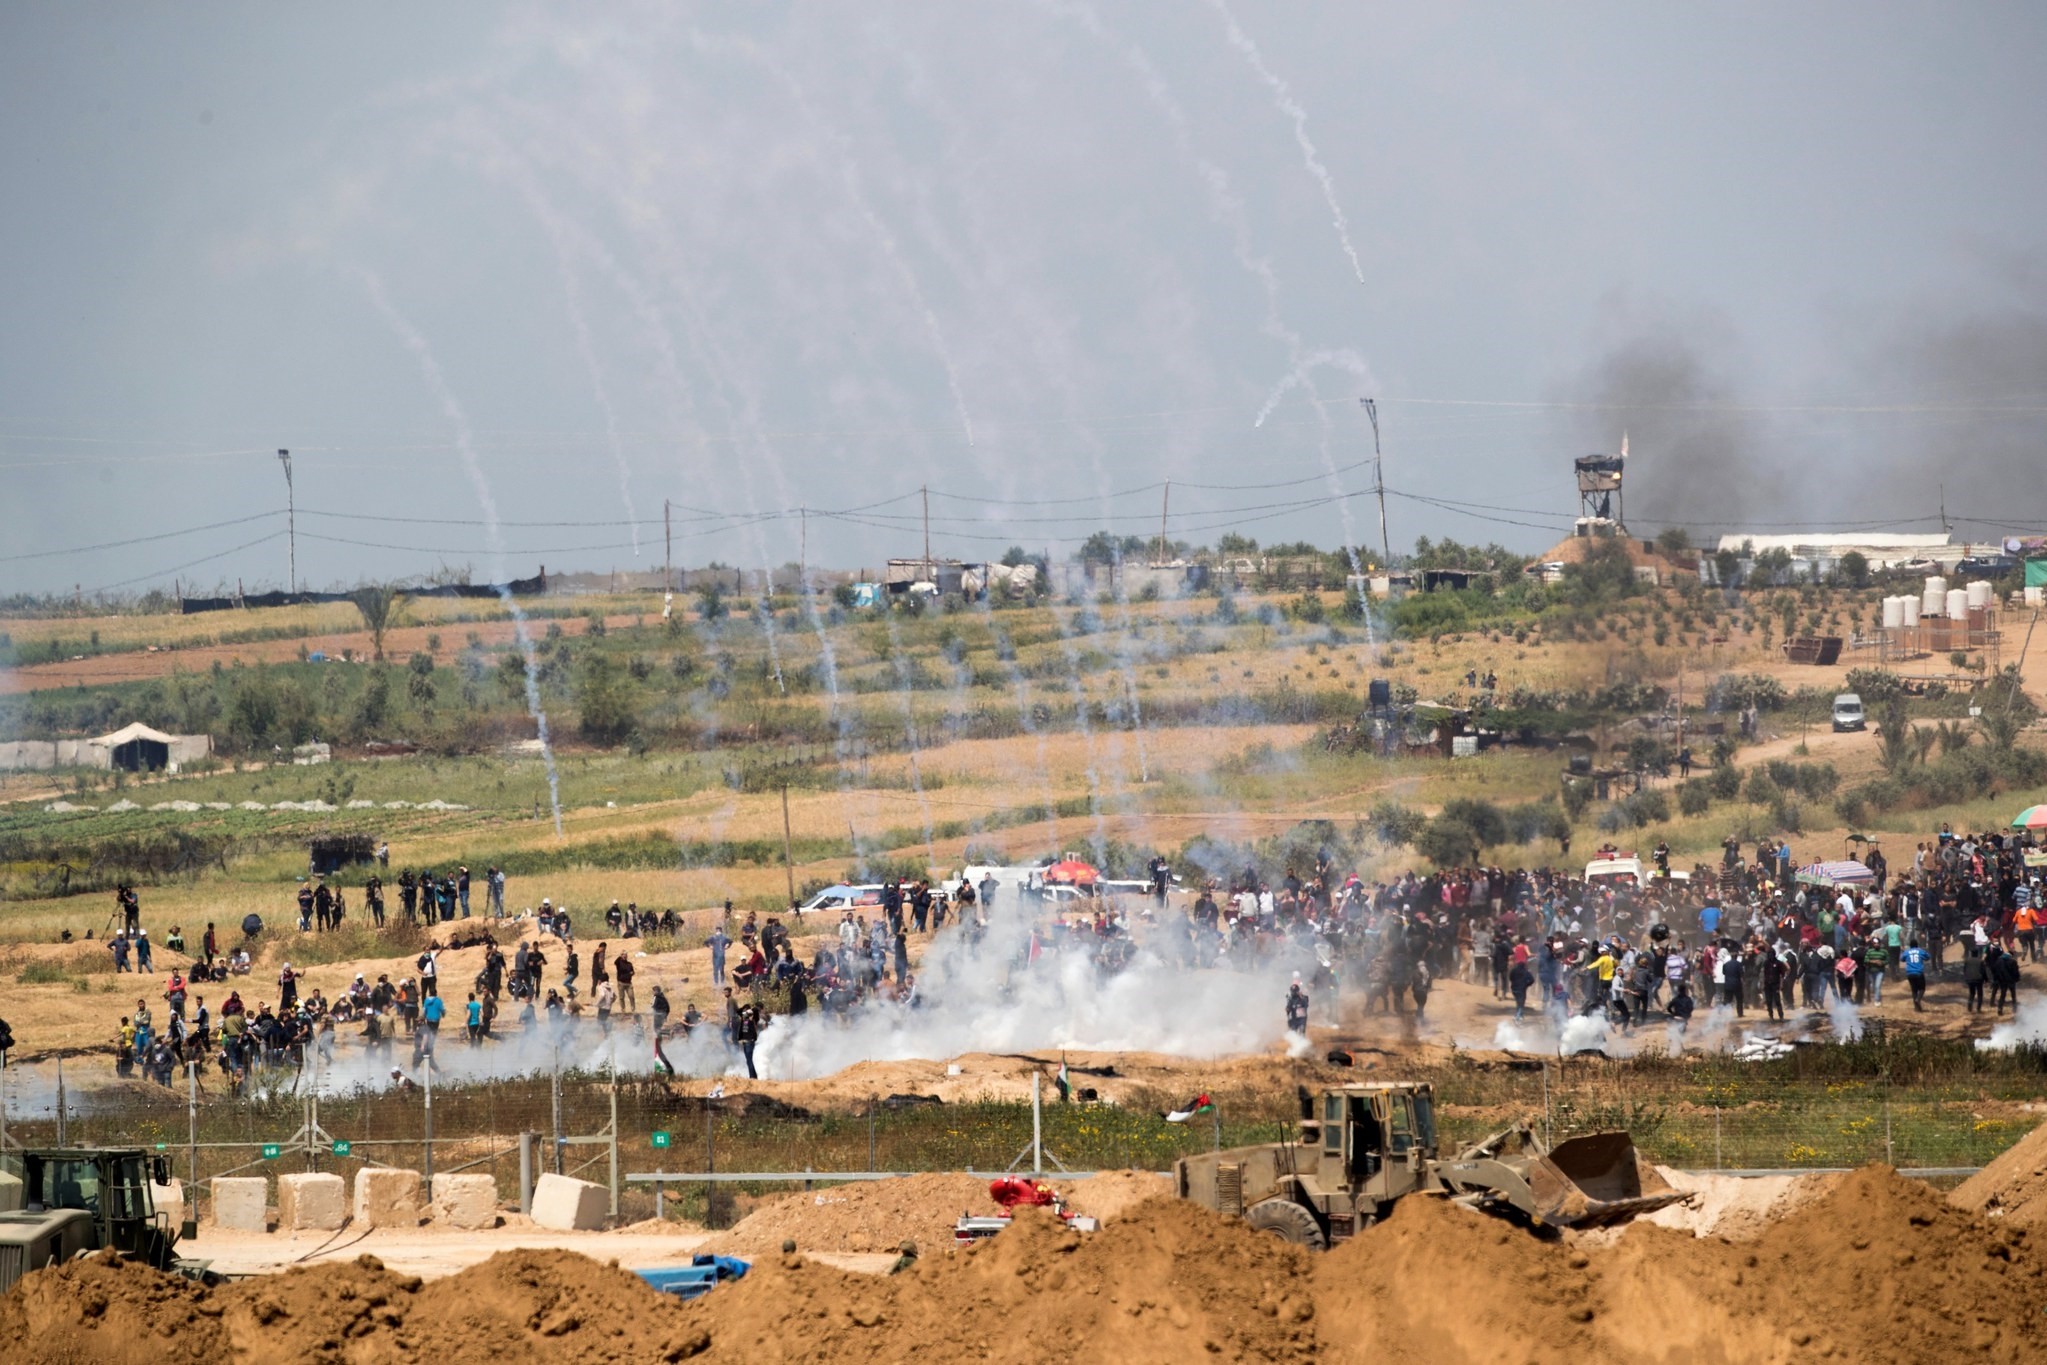 Tear gas canisters fired by Israeli forces fall around Palestinians from Gaza during a protest march at the Israeli Gaza border near Nahal Oz, facing the Gaza neighborhood of Shajaiyaon, April 6, 2018. (EPA Photo)